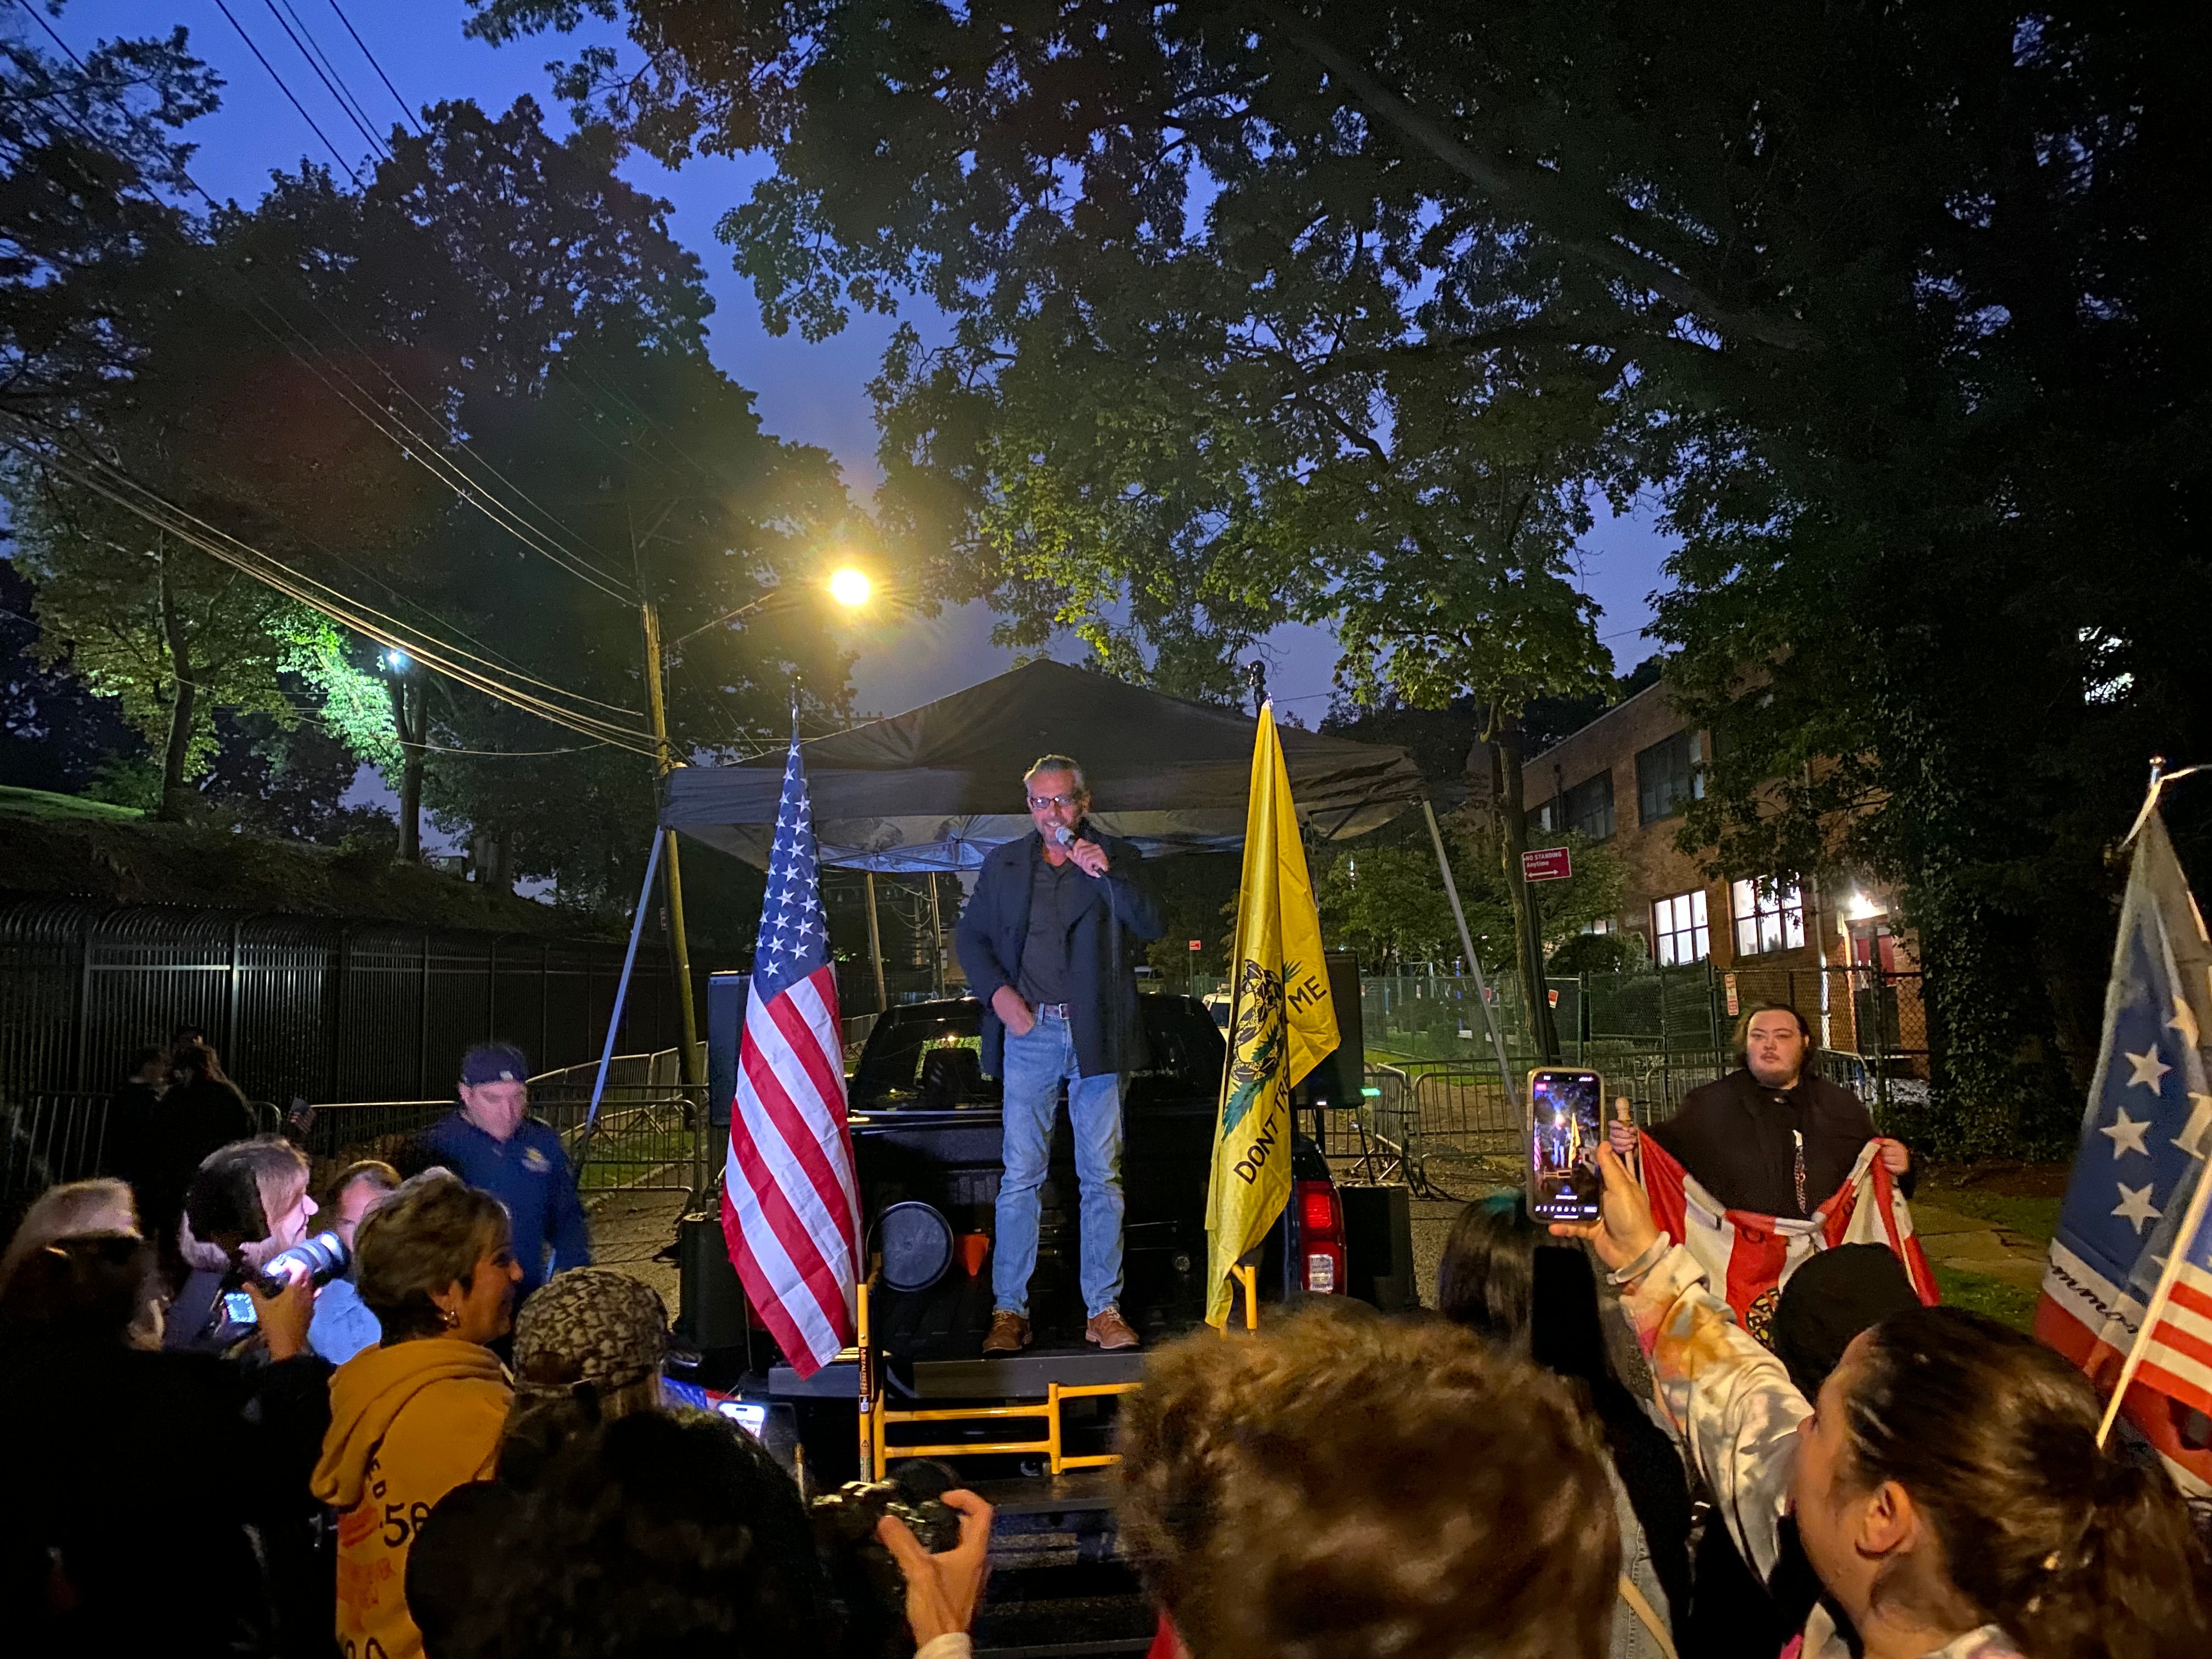 Scott LoBaido, an activist and artist who paints portraits of Donald Trump and American flags, addresses a protest outside of a migrant centre on Staten Island.